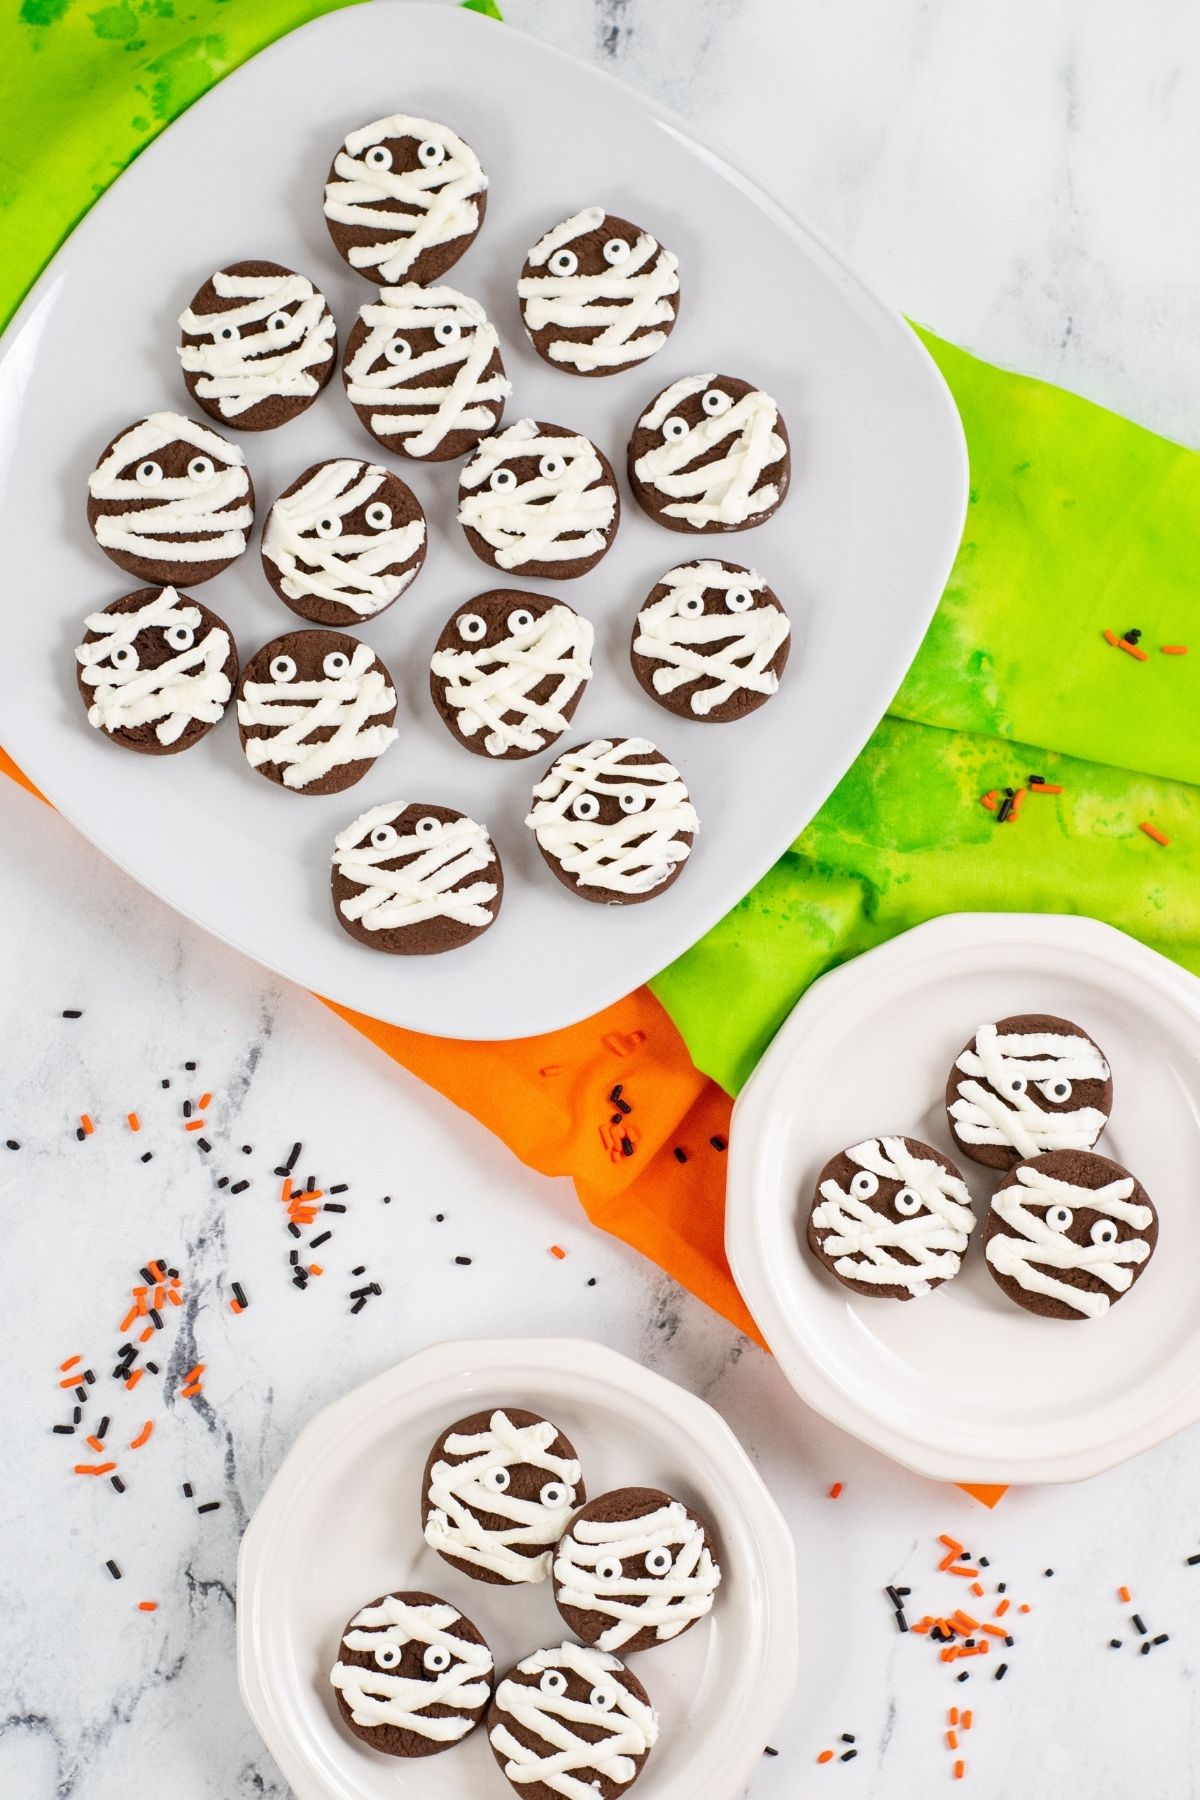 round chocolate cookies with mummy buttercream stripes and candy eyes on white plates